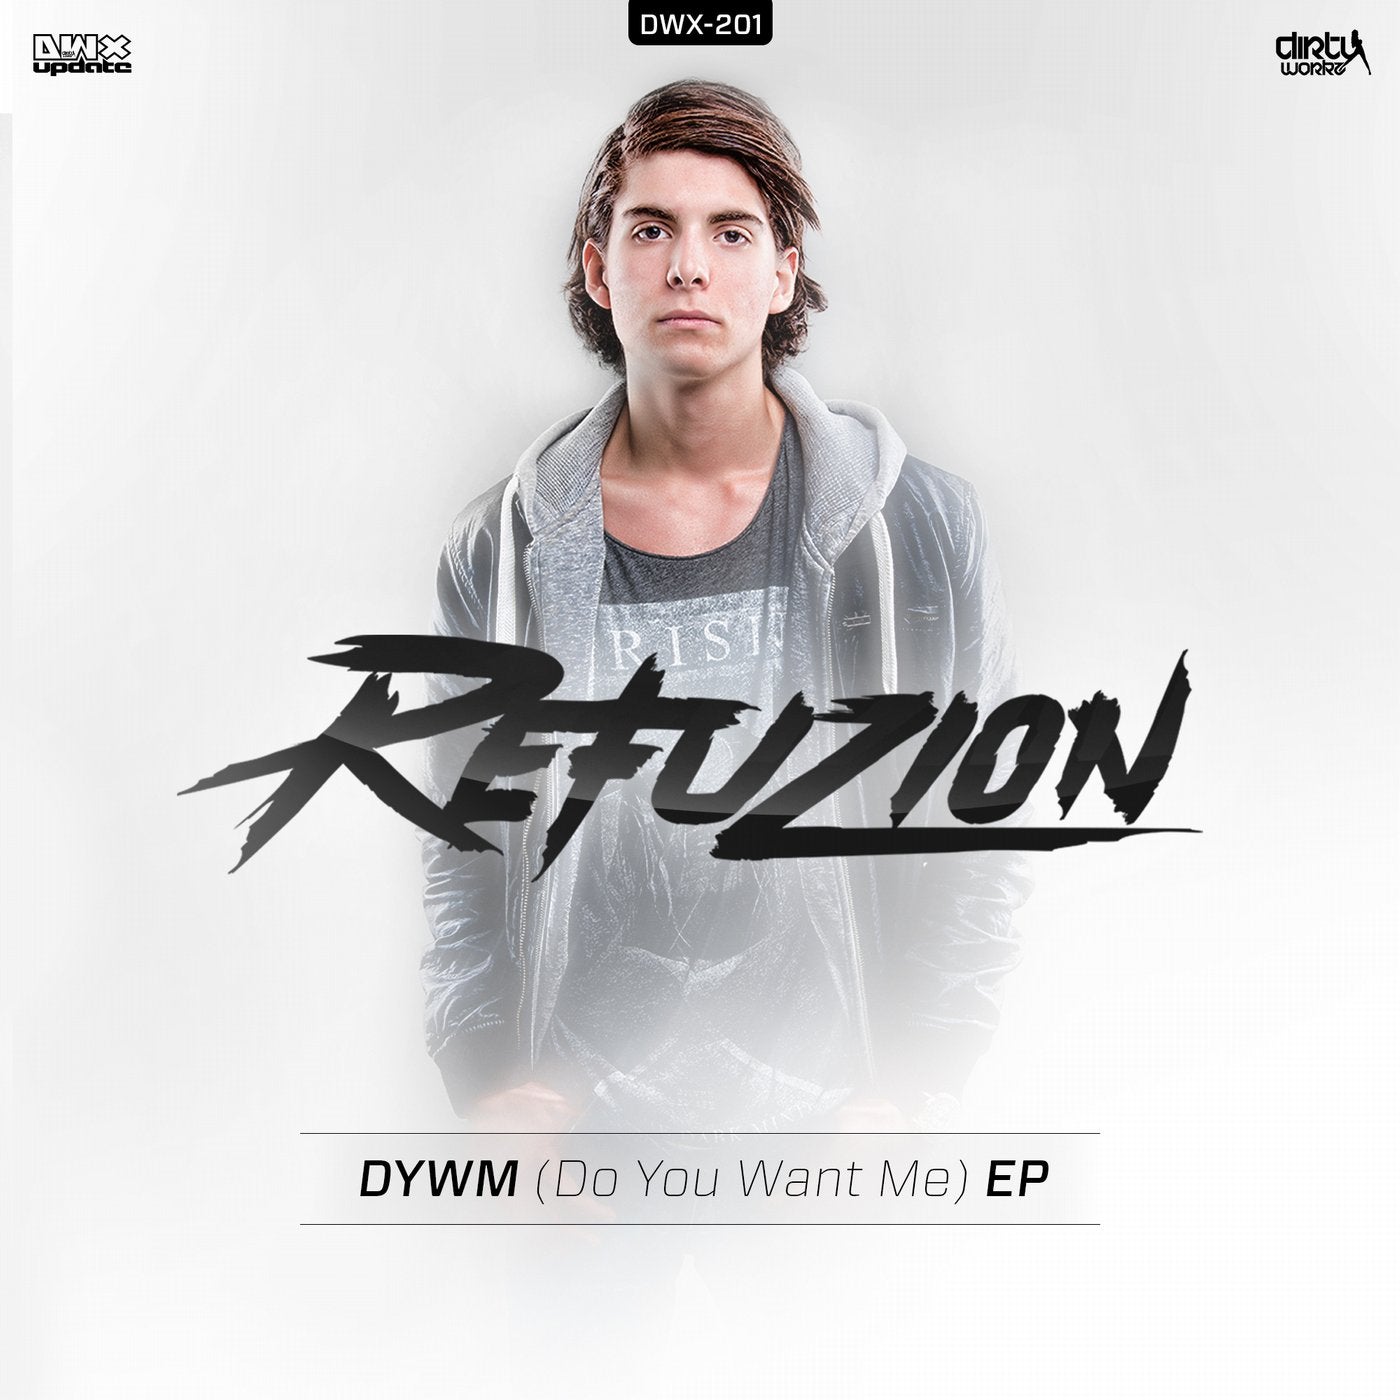 DYWM (Do You Want Me) EP